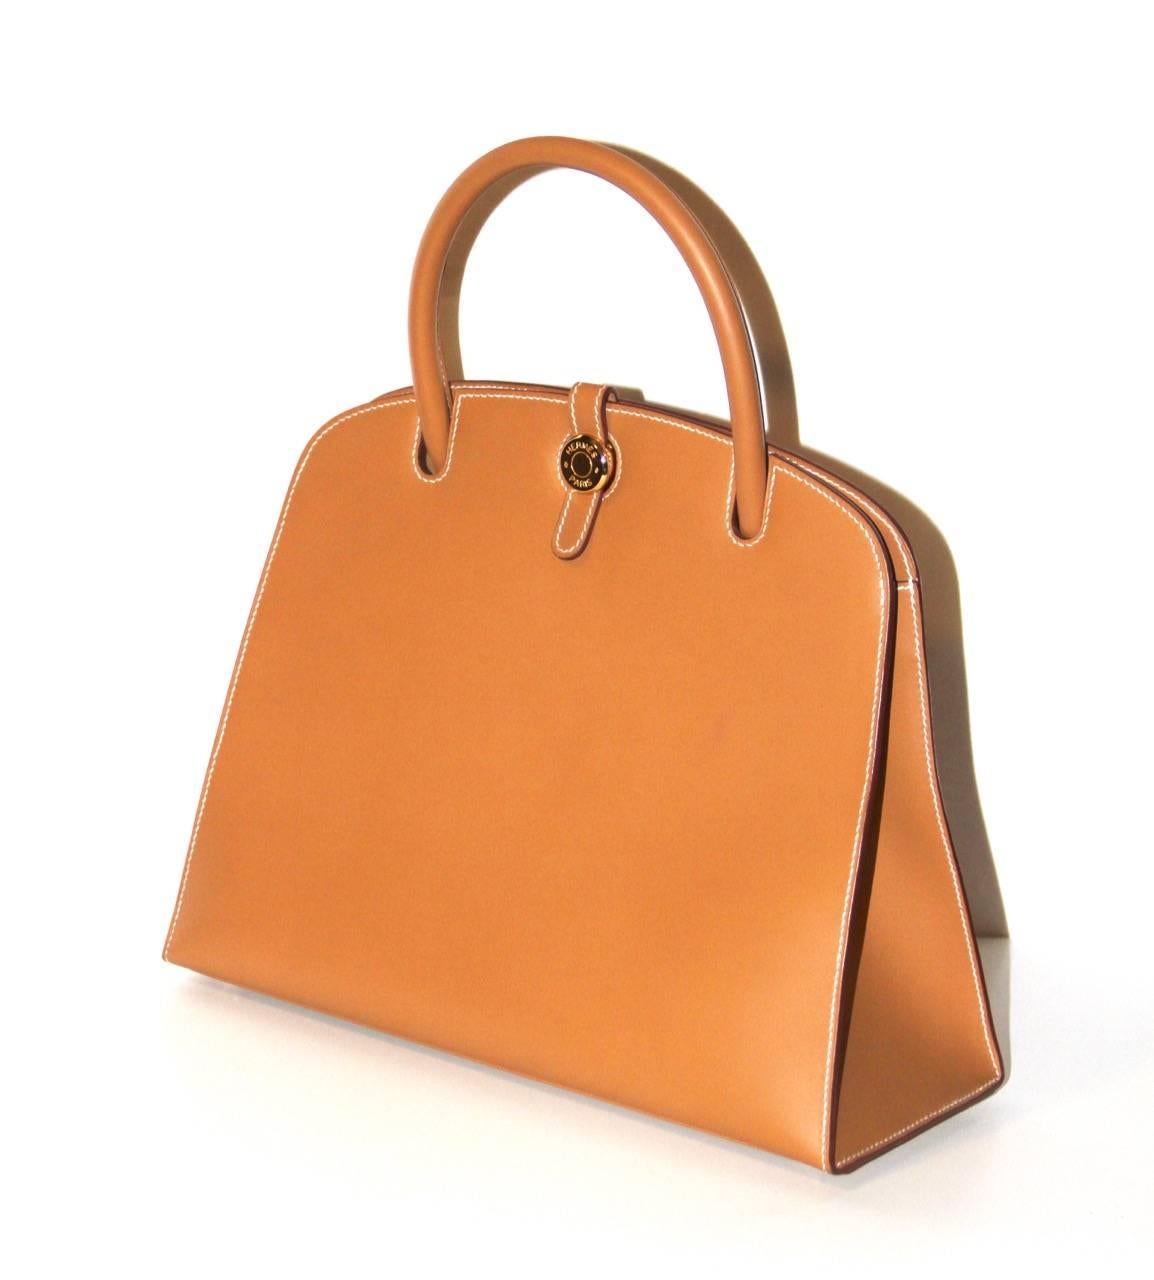 Elegant and sophisticated bag from Hermès with classic rigide shape, simple but strong look. This bag is very hard to find. Natural Chamonix leather Hermès, gold hardware, single rolled handle, white stitching, three interior wall pockets and Clou